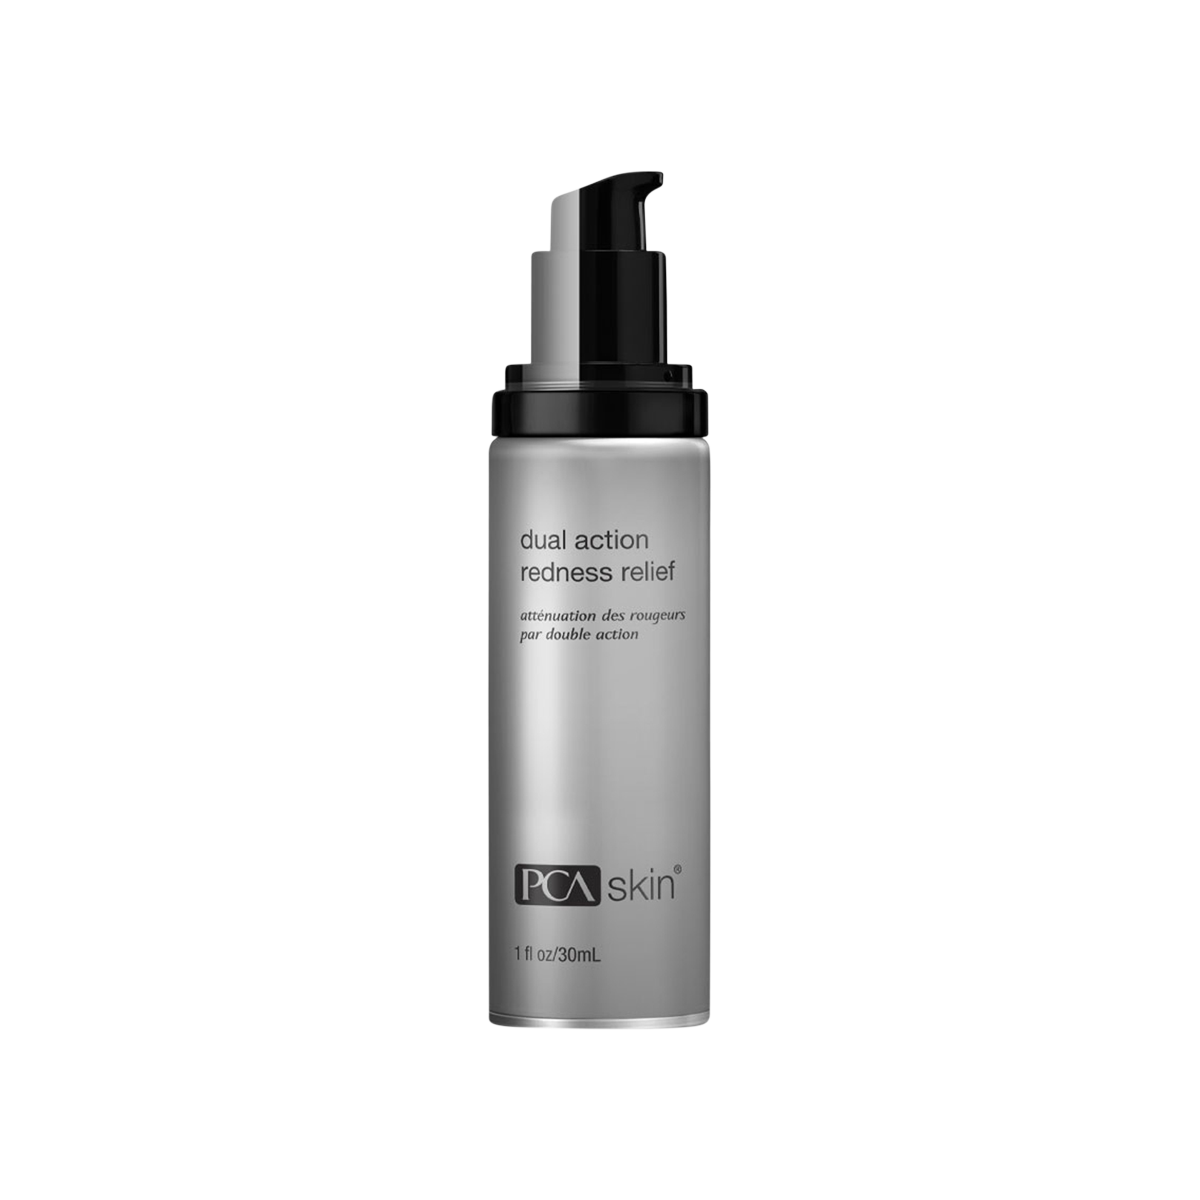 PCA Skin - Dual Action Redness Relief